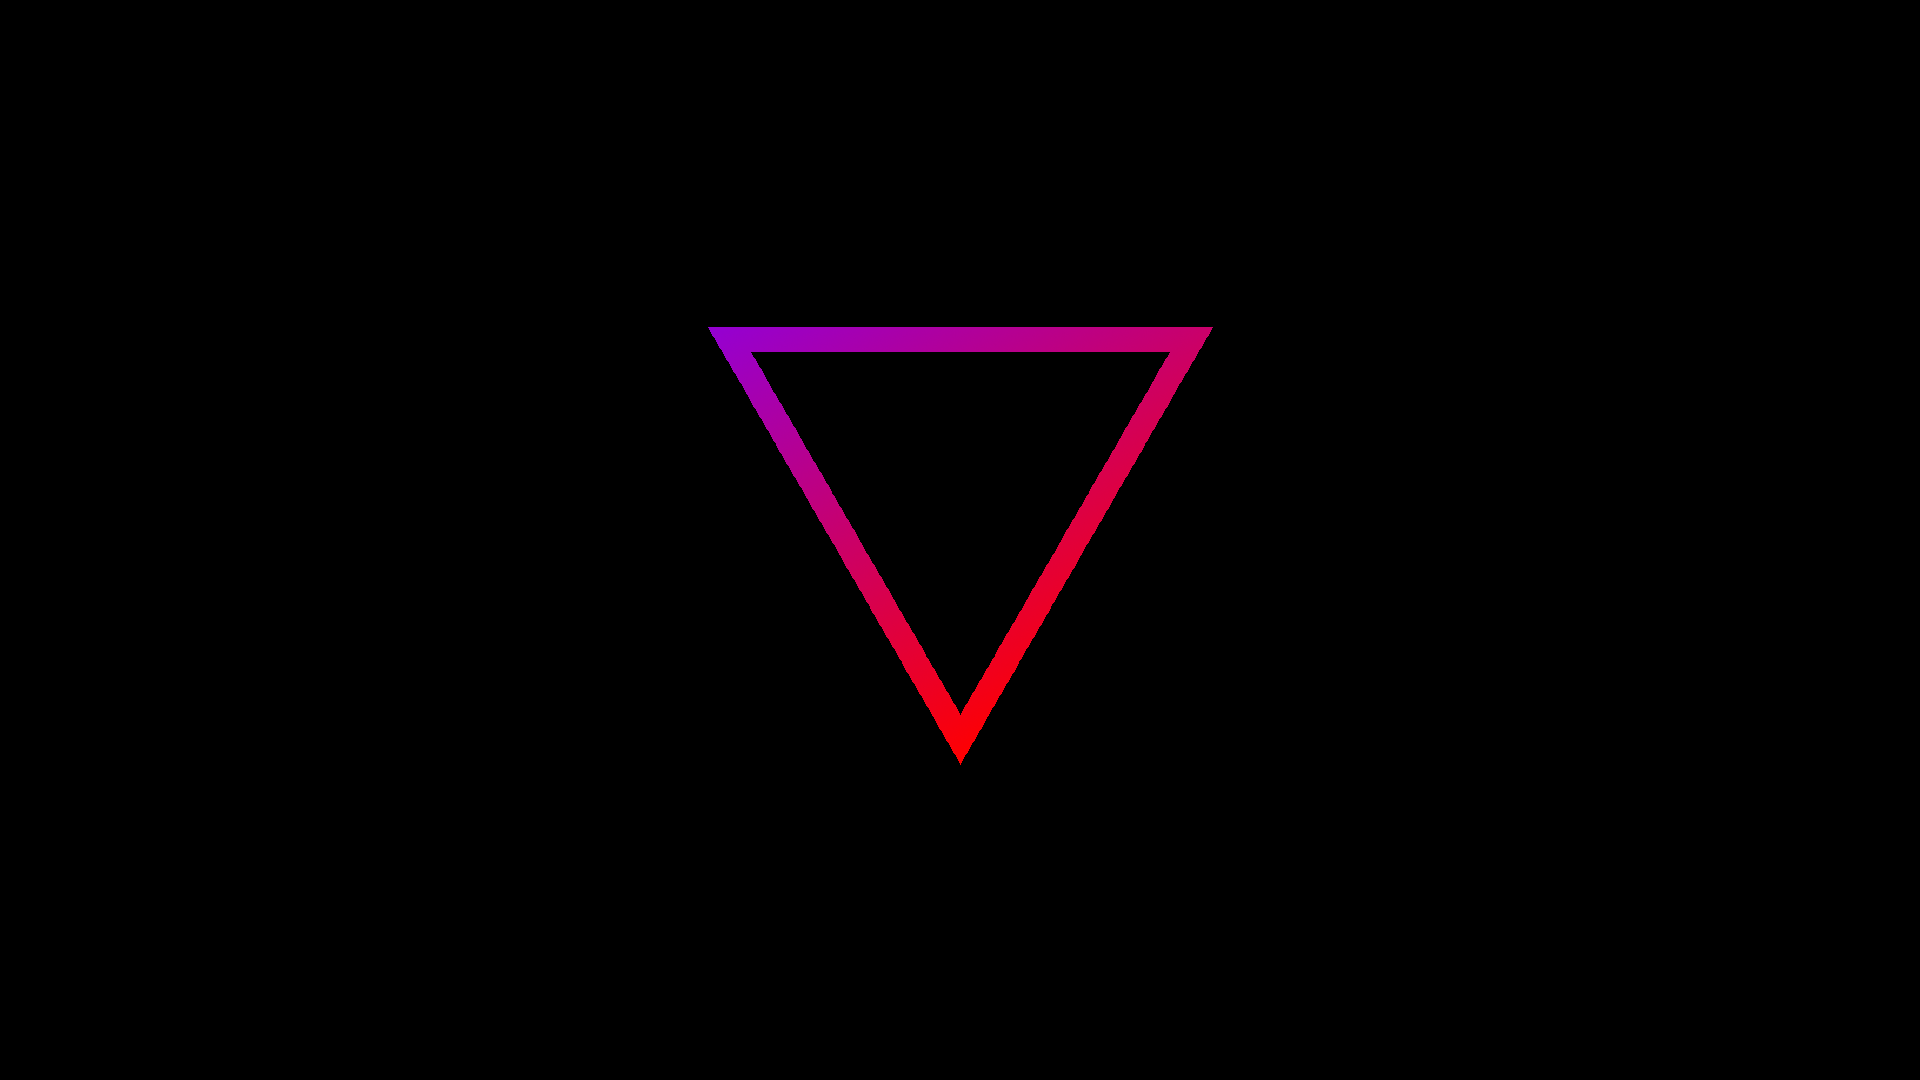 What does the upside-down triangle symbol mean in contemporary society?